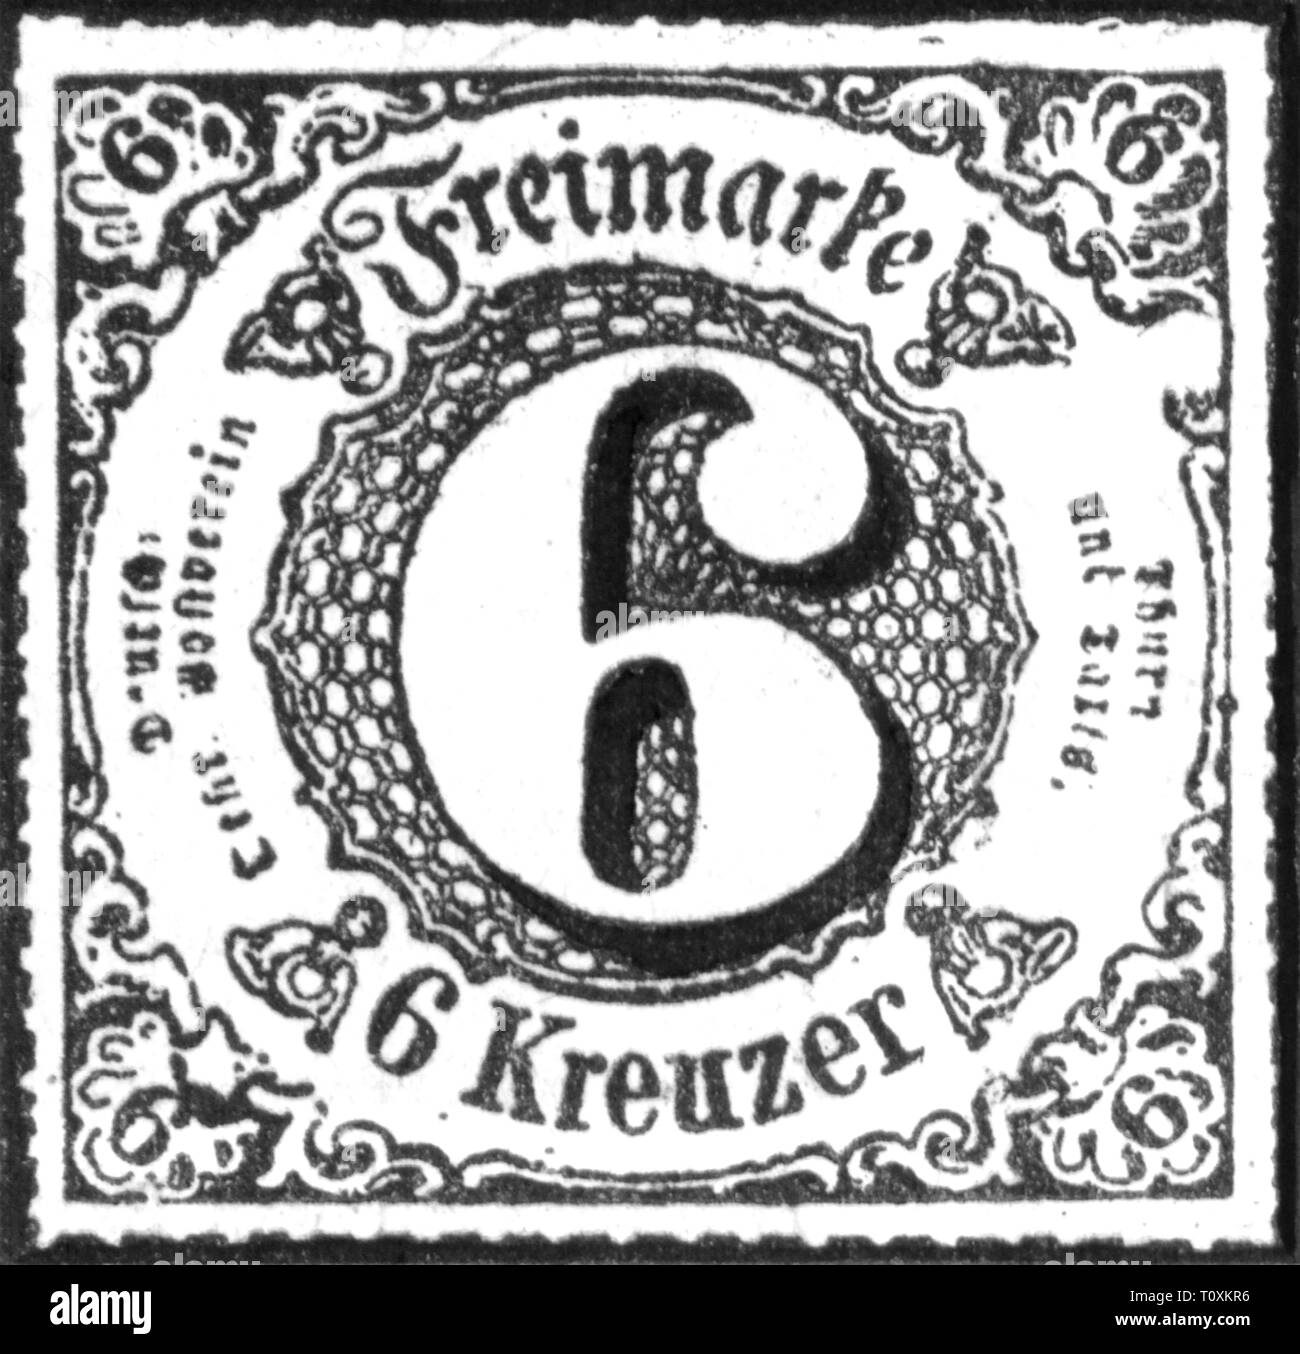 La poste, timbres, Allemagne, Thurn-und-Taxis-Post, 6 kreuzer timbre-poste, district du Sud, 1866, Additional-Rights Clearance-Info-Not-Available- Banque D'Images